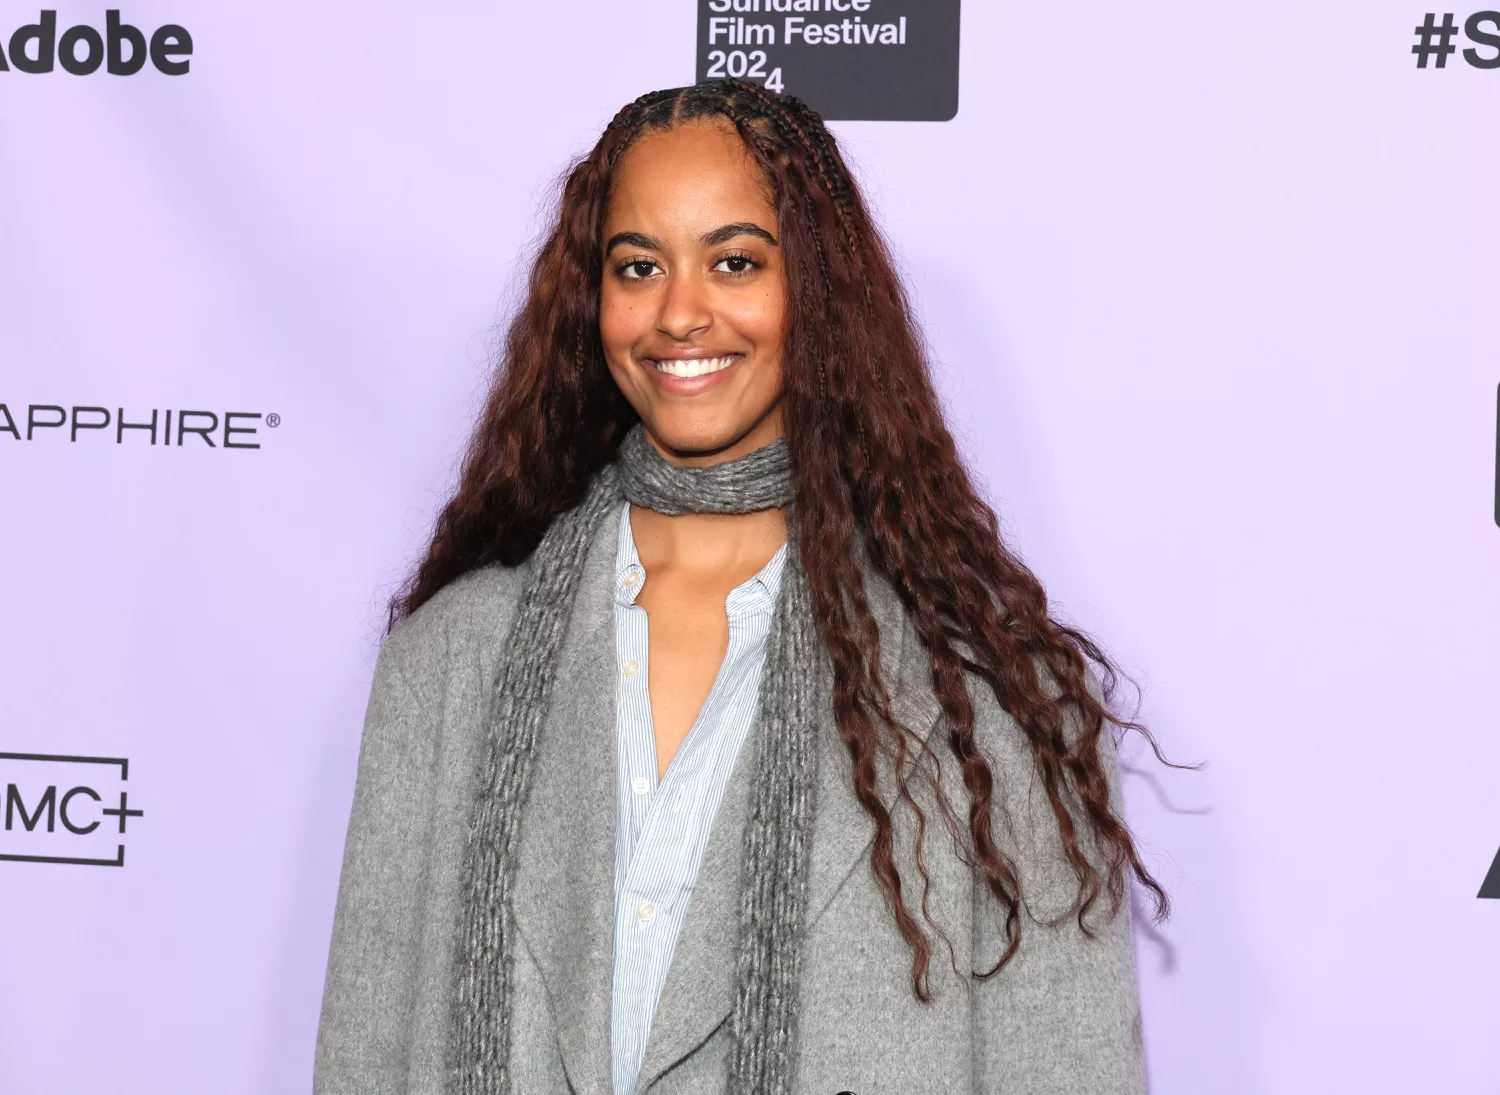 Malia Obama Made Her Red Carpet Debut in the Coziest Winter Outfit at Sundance Film Festival